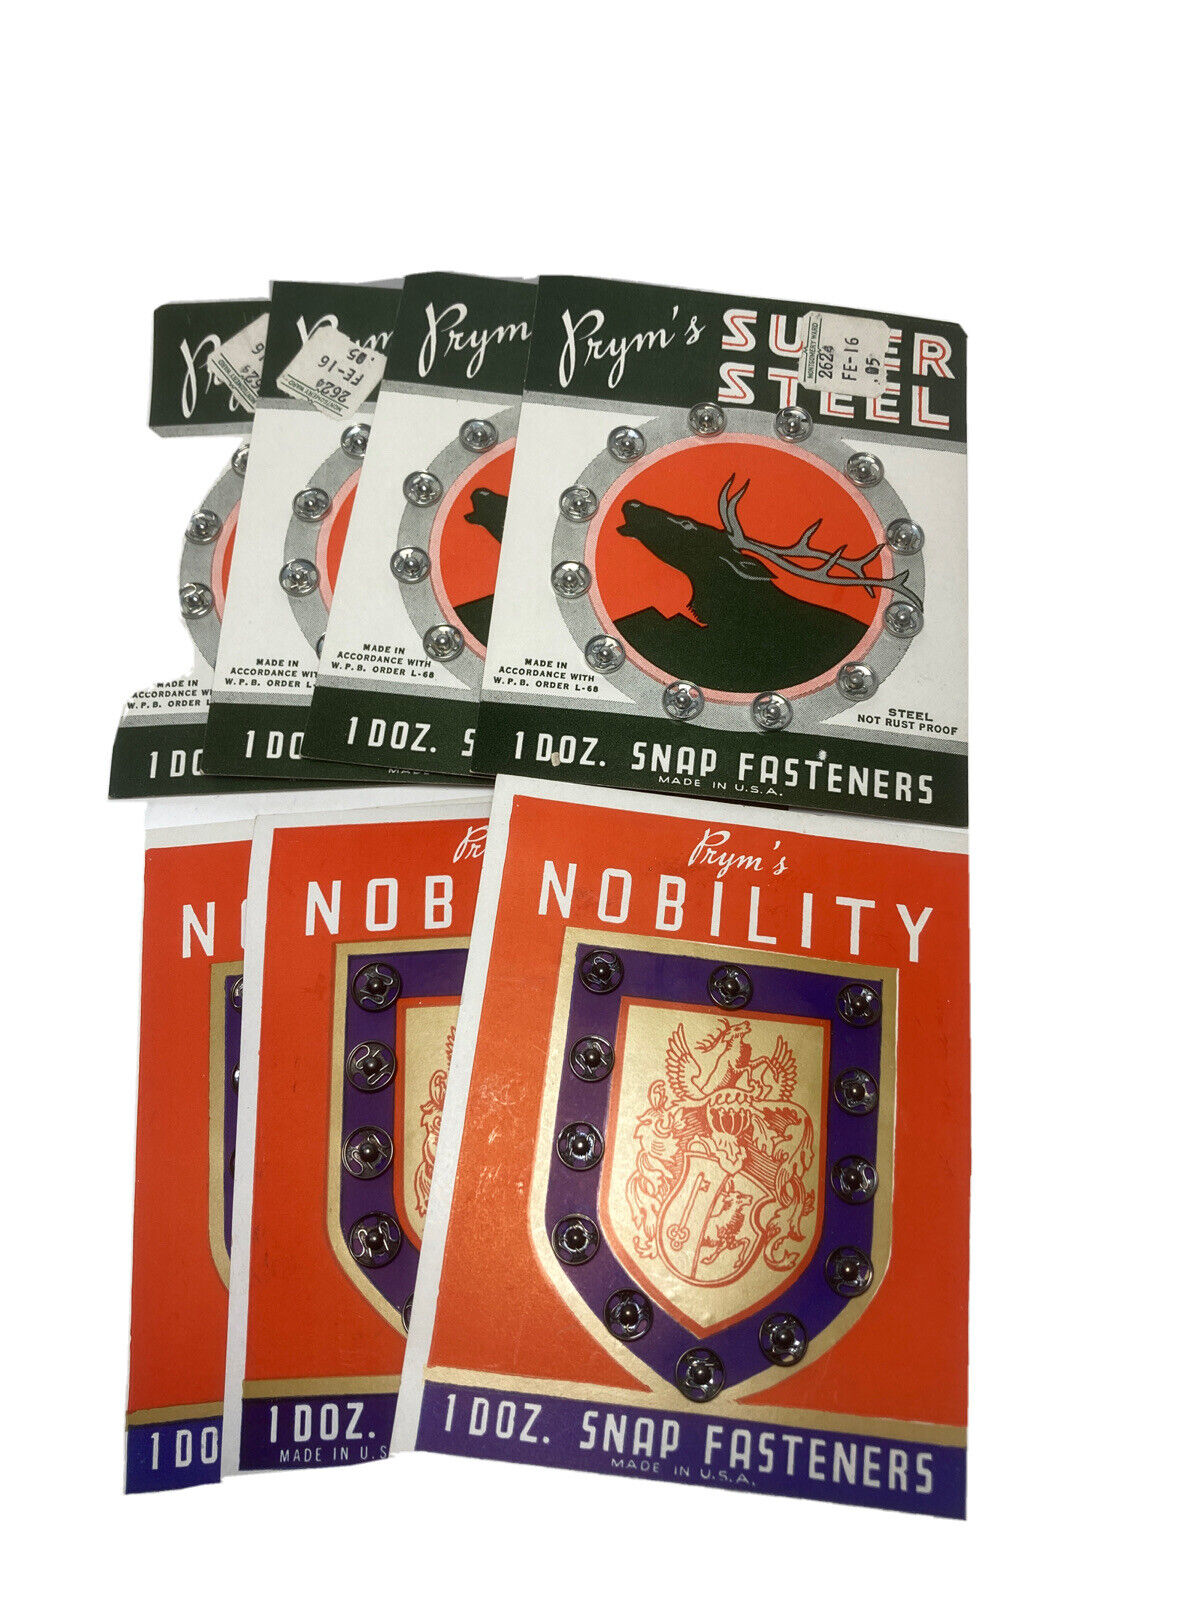 Vntg Prym’s Super Steel & Nobility Snap Fasteners Lot of 7 cards 1940’s NOS USA